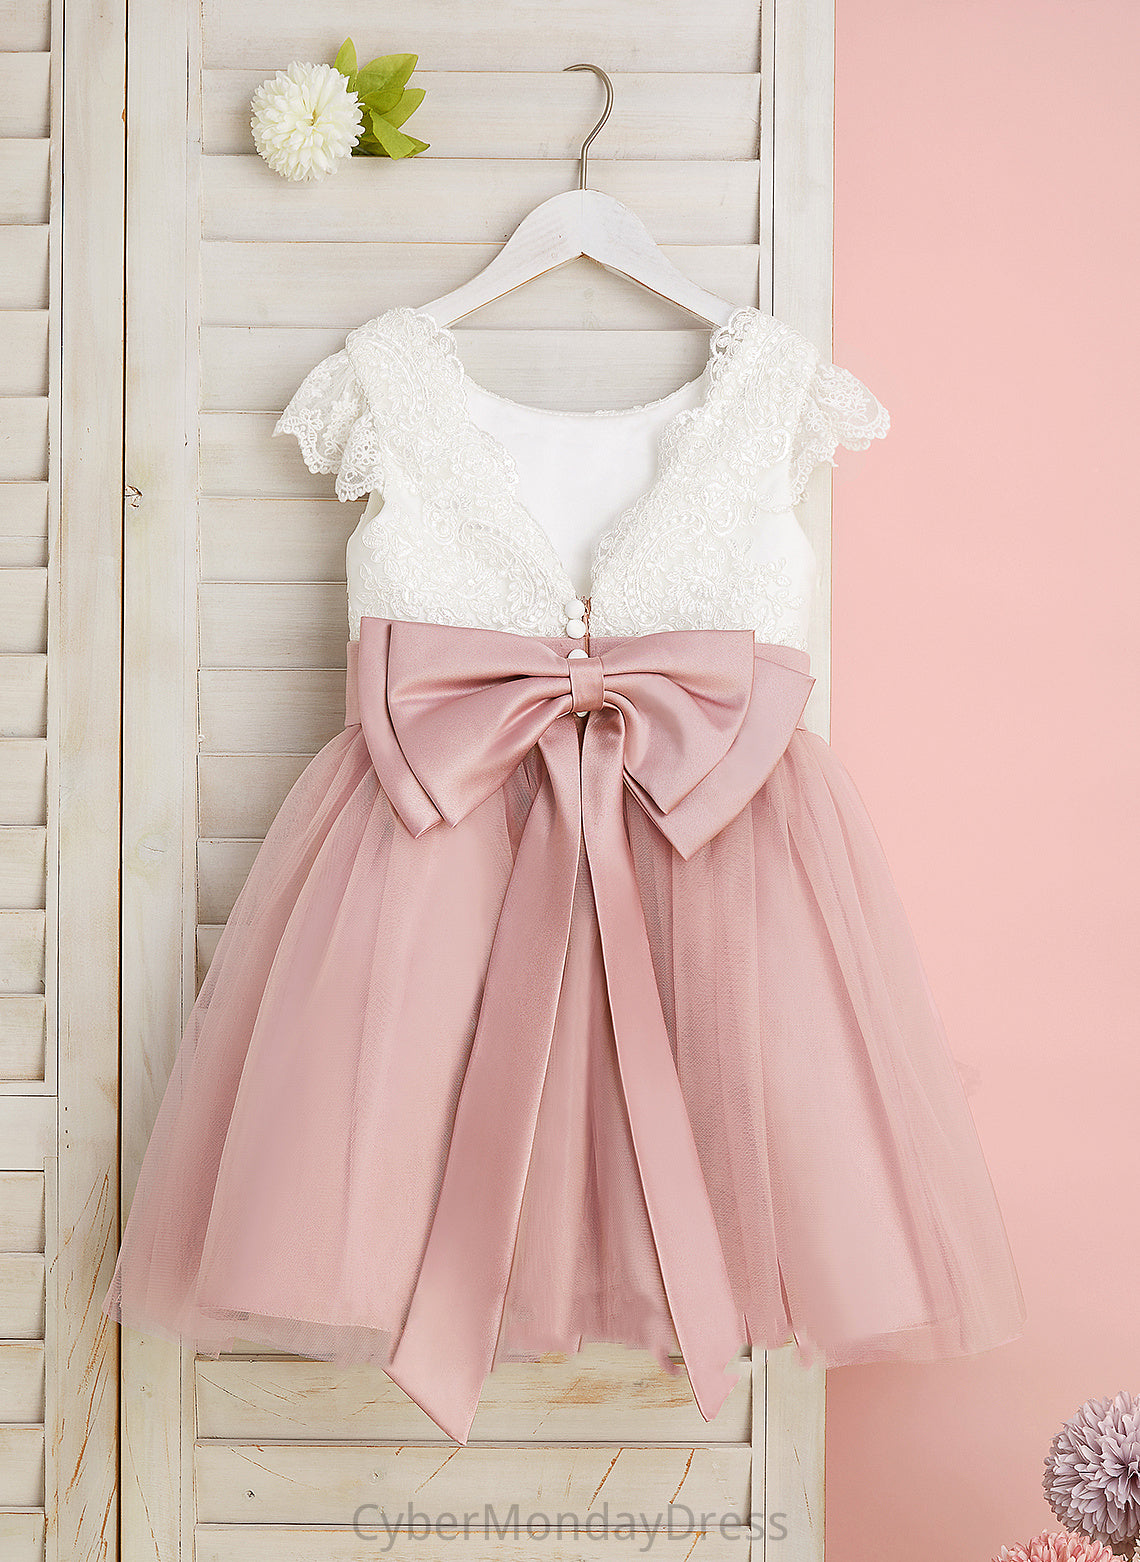 Flower With A-Line Short Lace/Bow(s) Flower Girl Dresses Monica Dress Knee-length Neck Sleeves - Girl Scoop Tulle